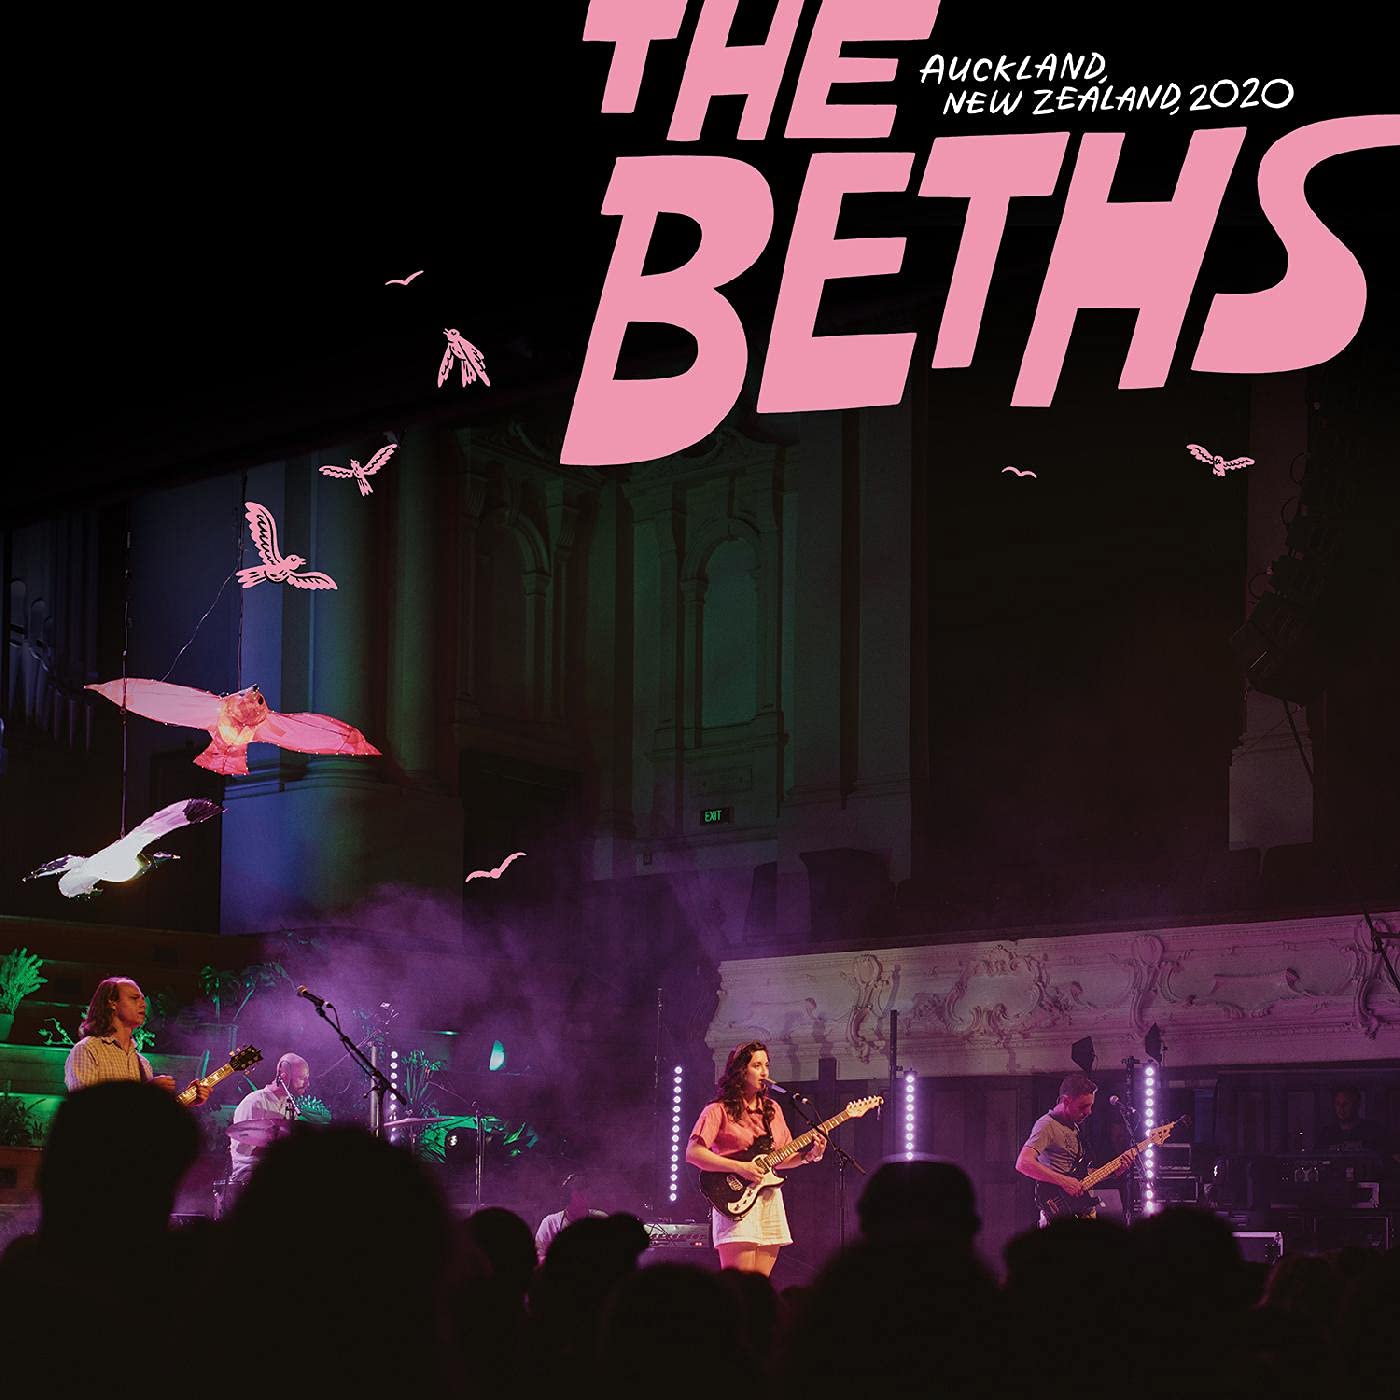 The Beths – Auckland, New Zealand, 2020 [2 LP] (Translucent Teal)